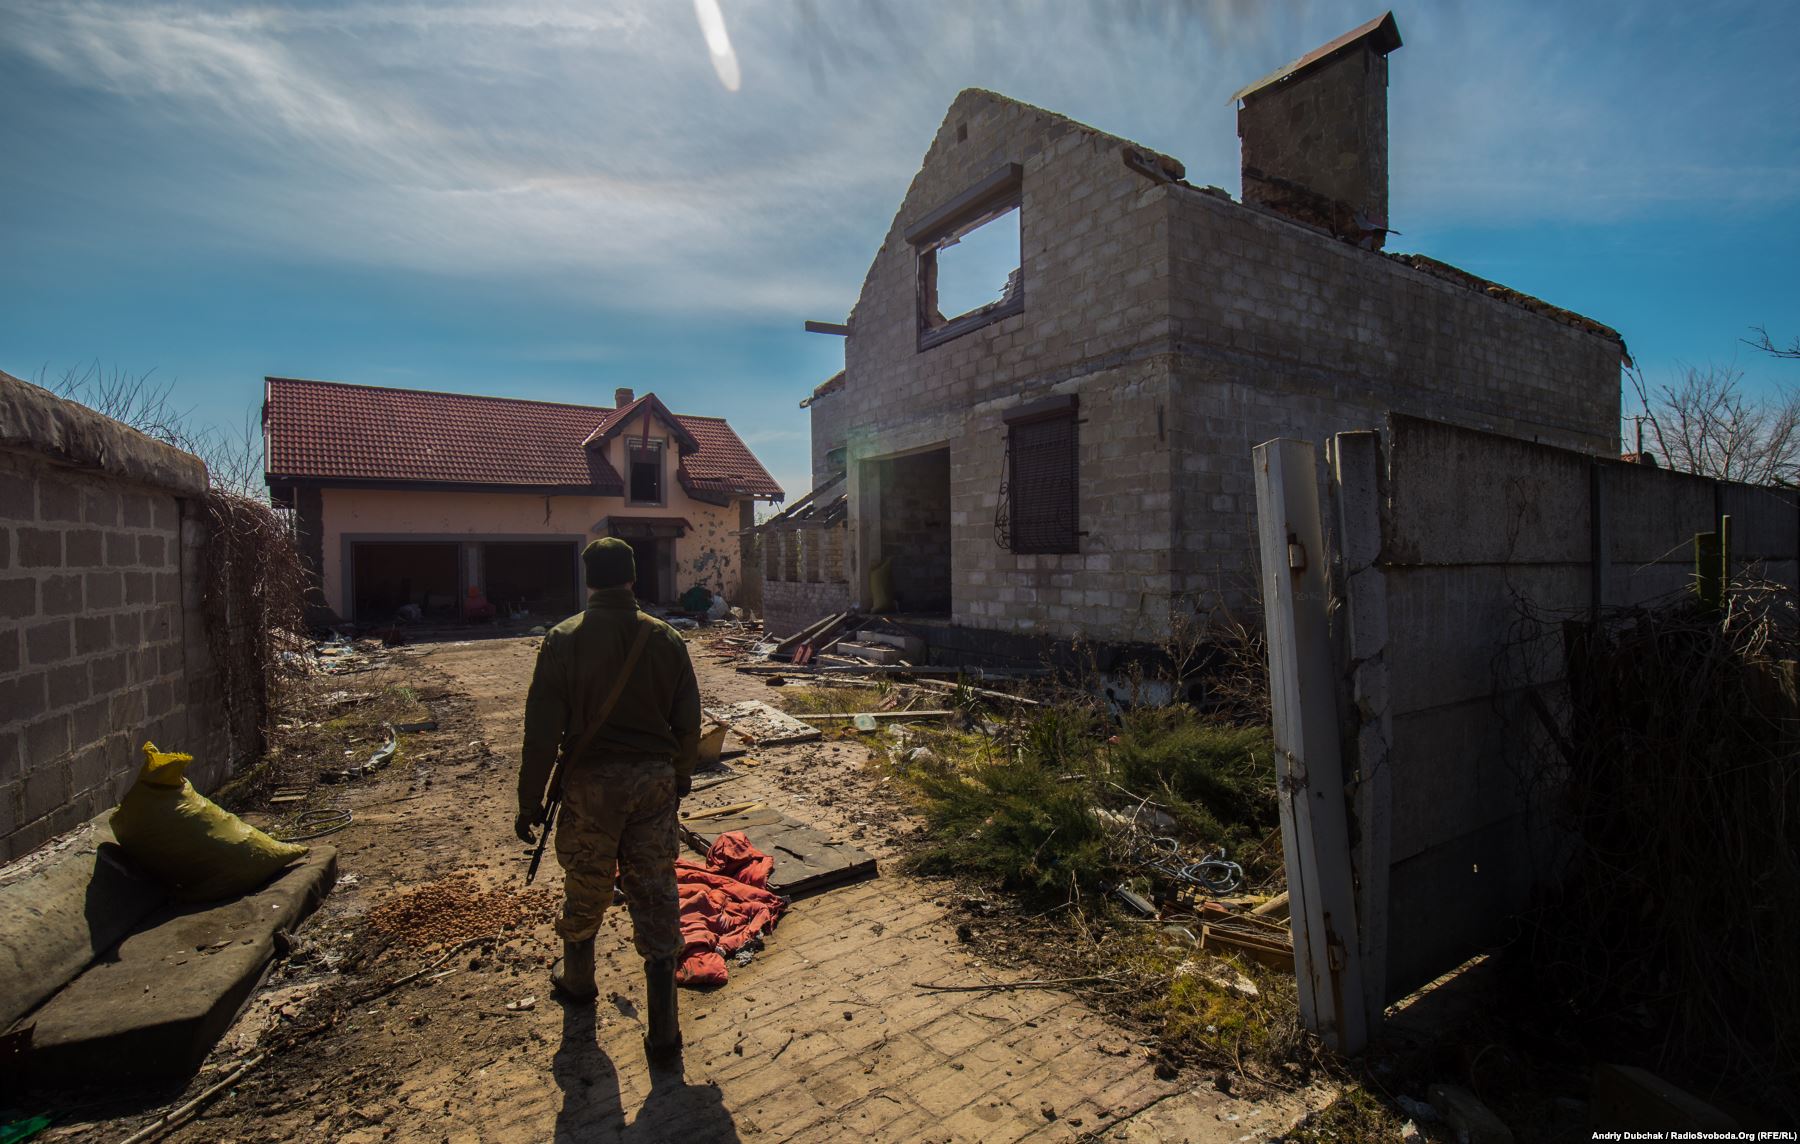 About half of the houses in Vodyane, a holiday village 12 kms from the Black Sea port Mariupol, have been destroyed or damaged beyond repair in fighting between Russia-backed separatists and the Ukrainian military. Photo by: Andriy Dubchak